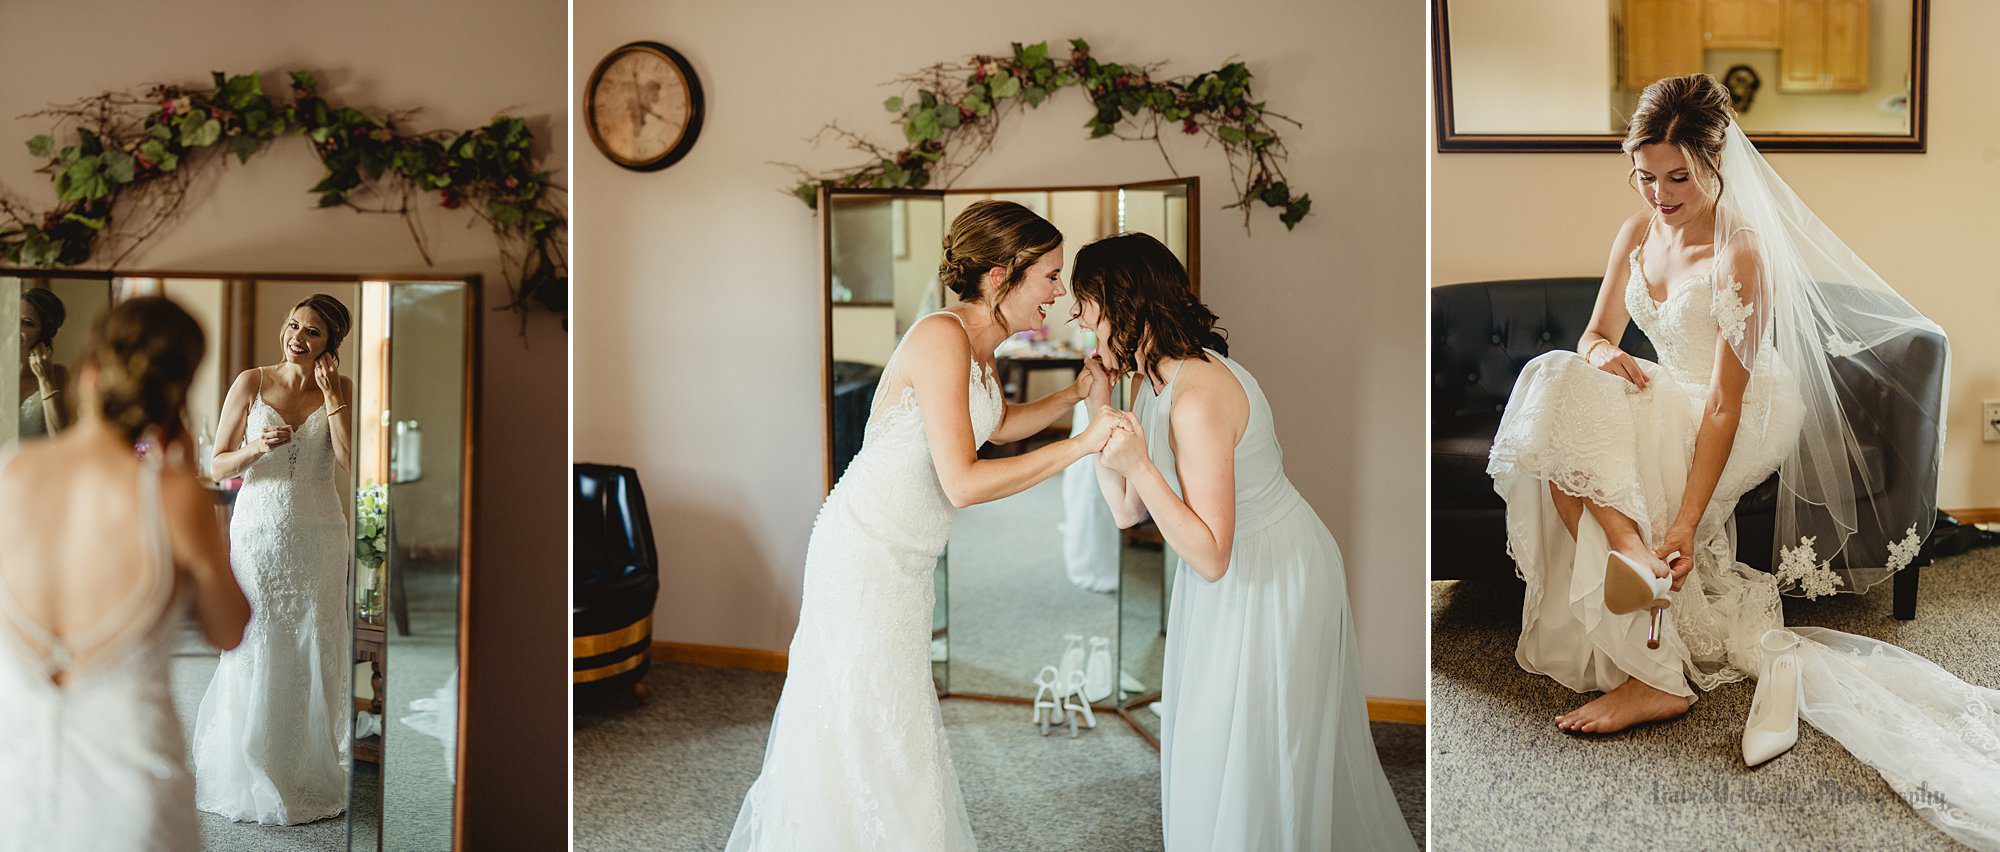 bride and maid of honor photo with Laura Hollander Photography